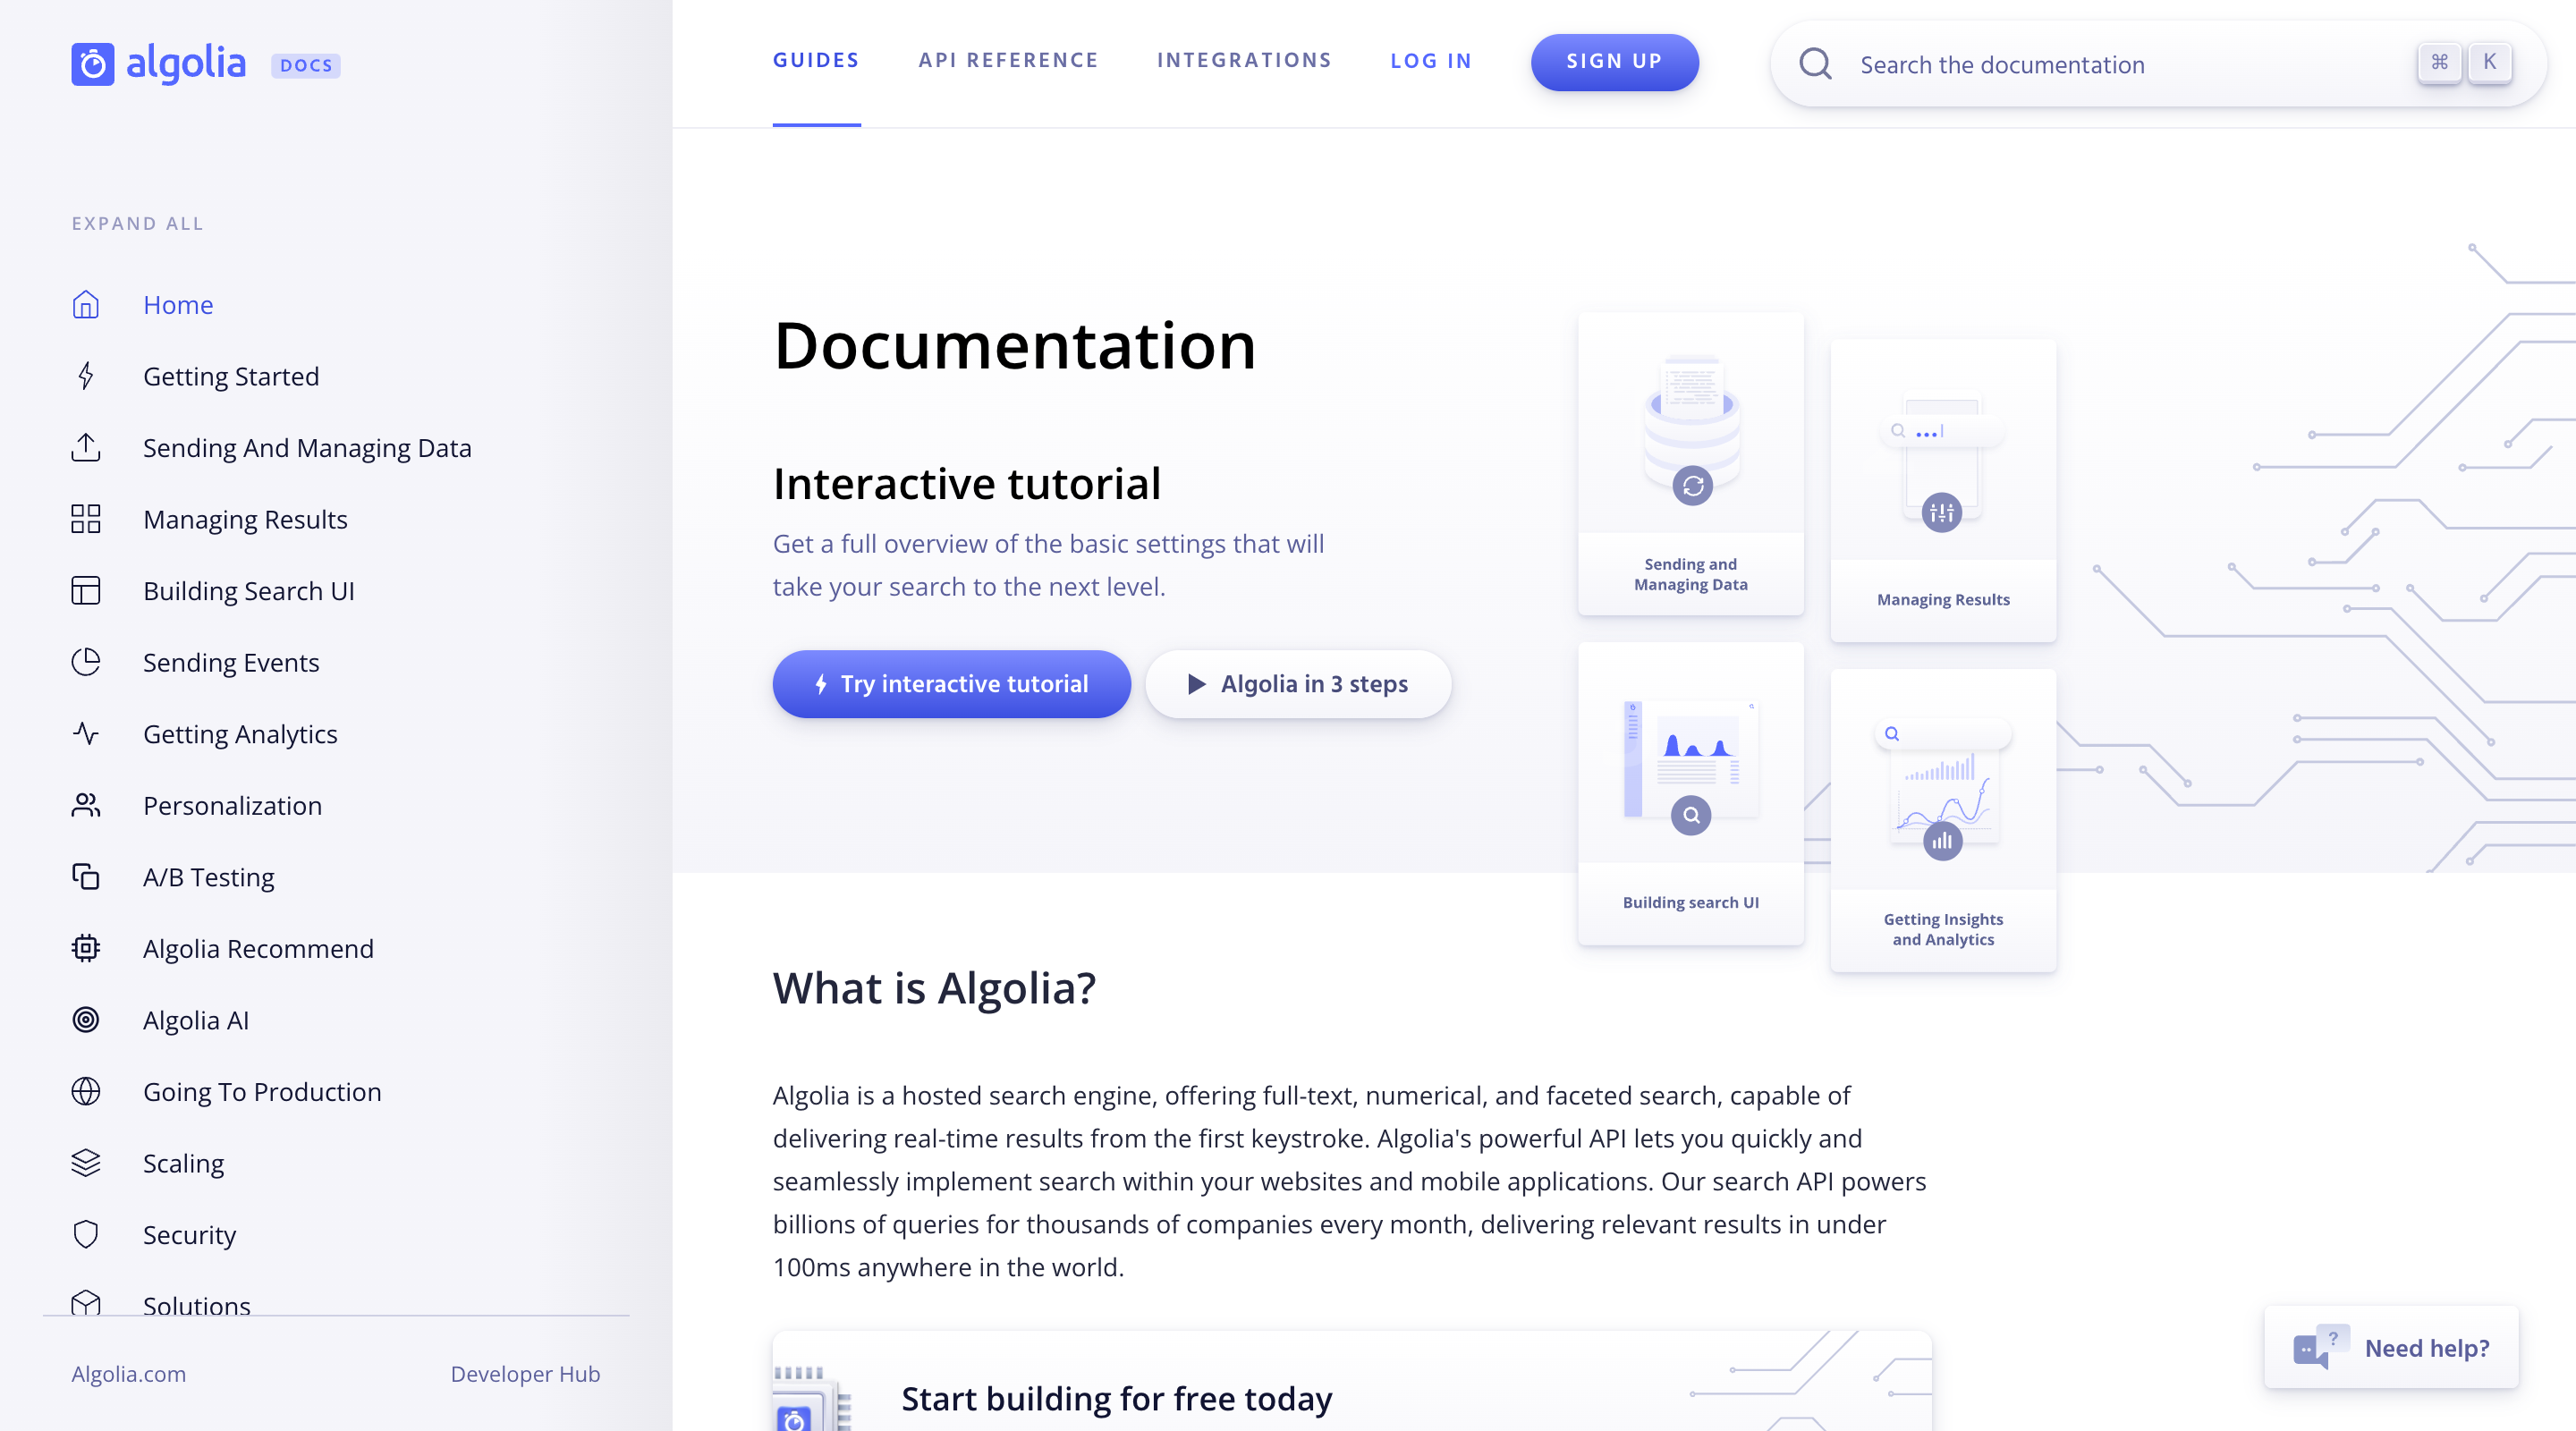 Screenshot of the Algolia documentation home page. A fixed sidebar lists the various guides. Call-to-actions in the hero section invite the user to try an interactive tutorial or learn more about Algolia.